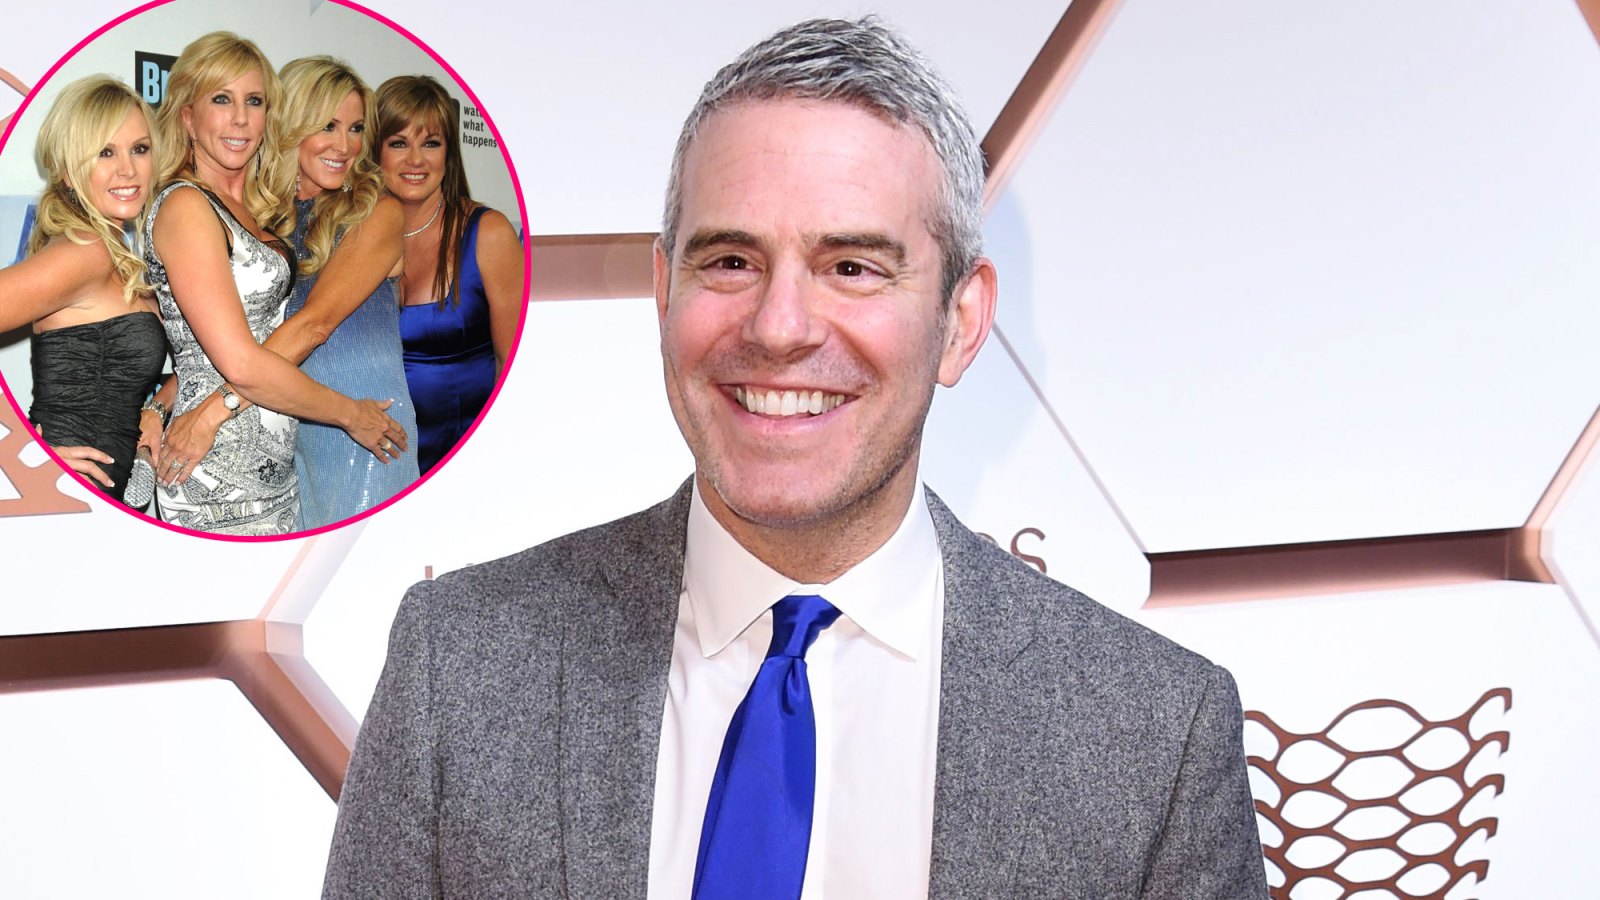 Andy Cohen Thinks Early ‘Housewives’ Dressed Like They Were Going to a PTA Meeting: ’The Fashion Was Just Terrible’